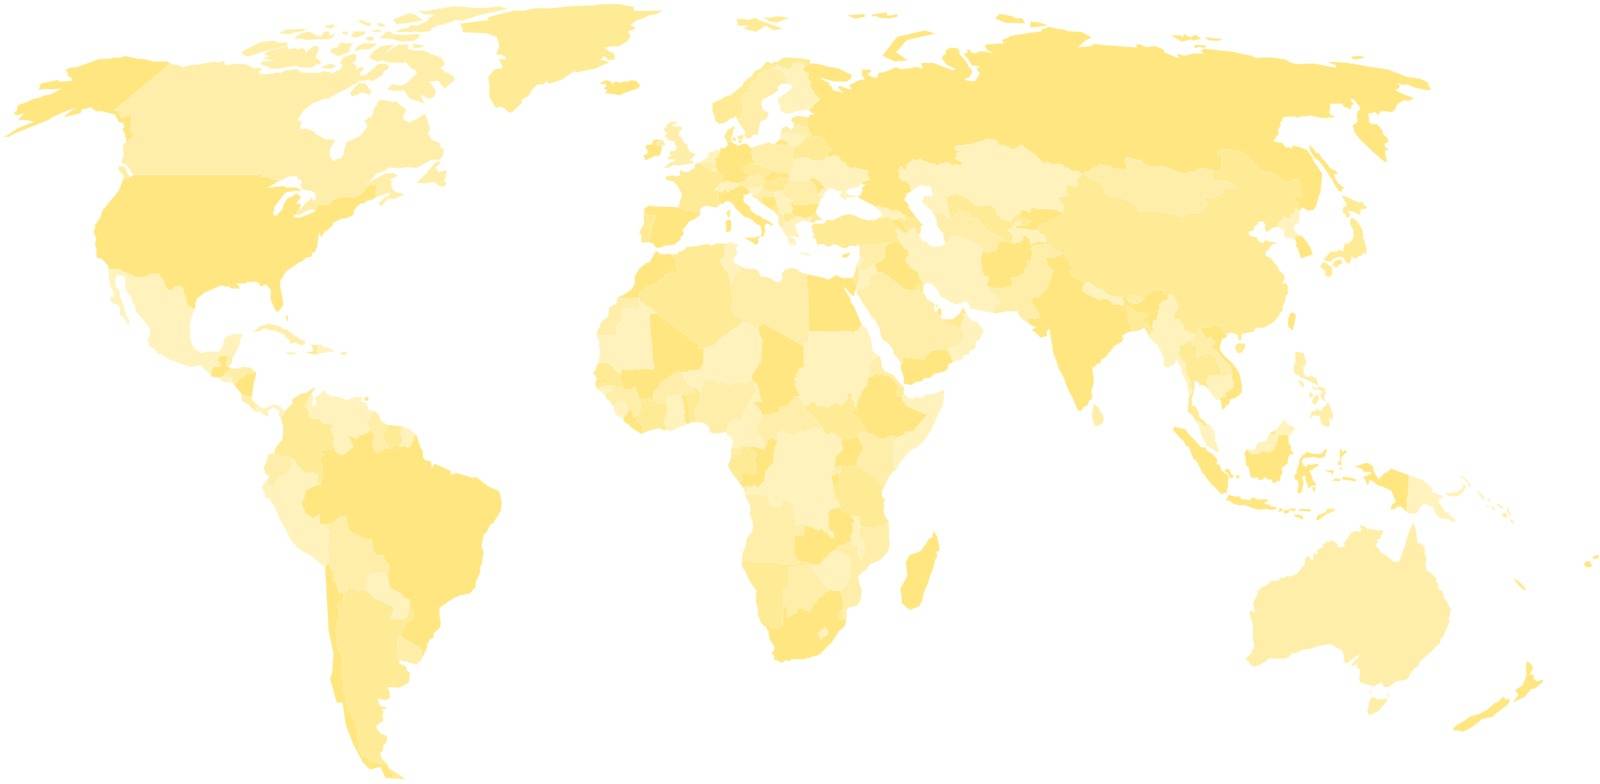 Blank political map of world by pyty